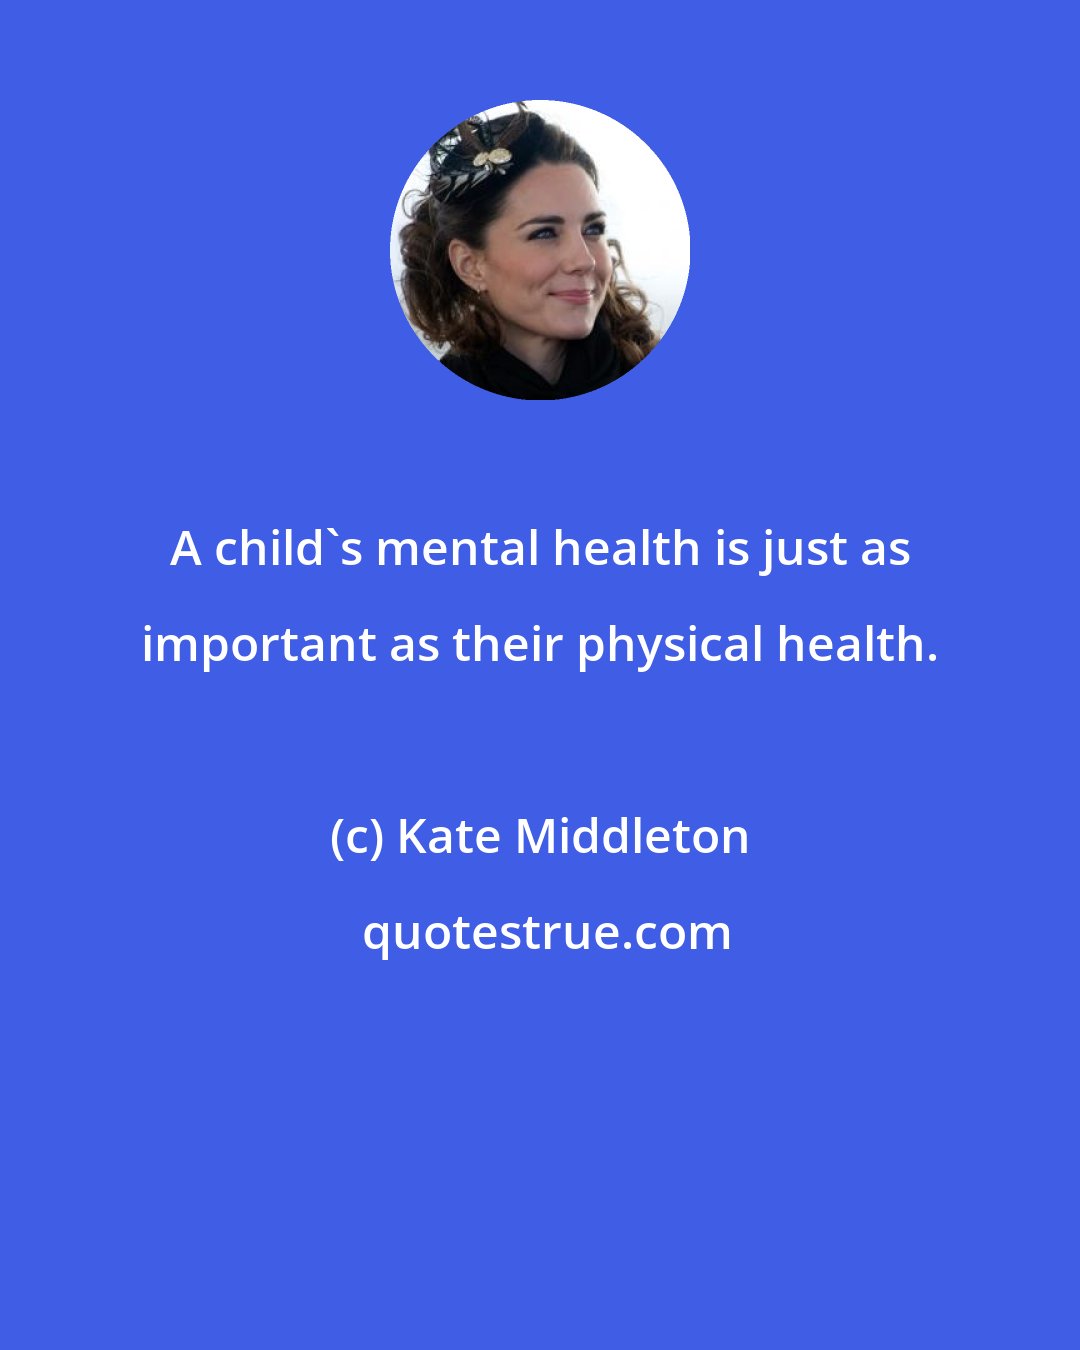 Kate Middleton: A child's mental health is just as important as their physical health.